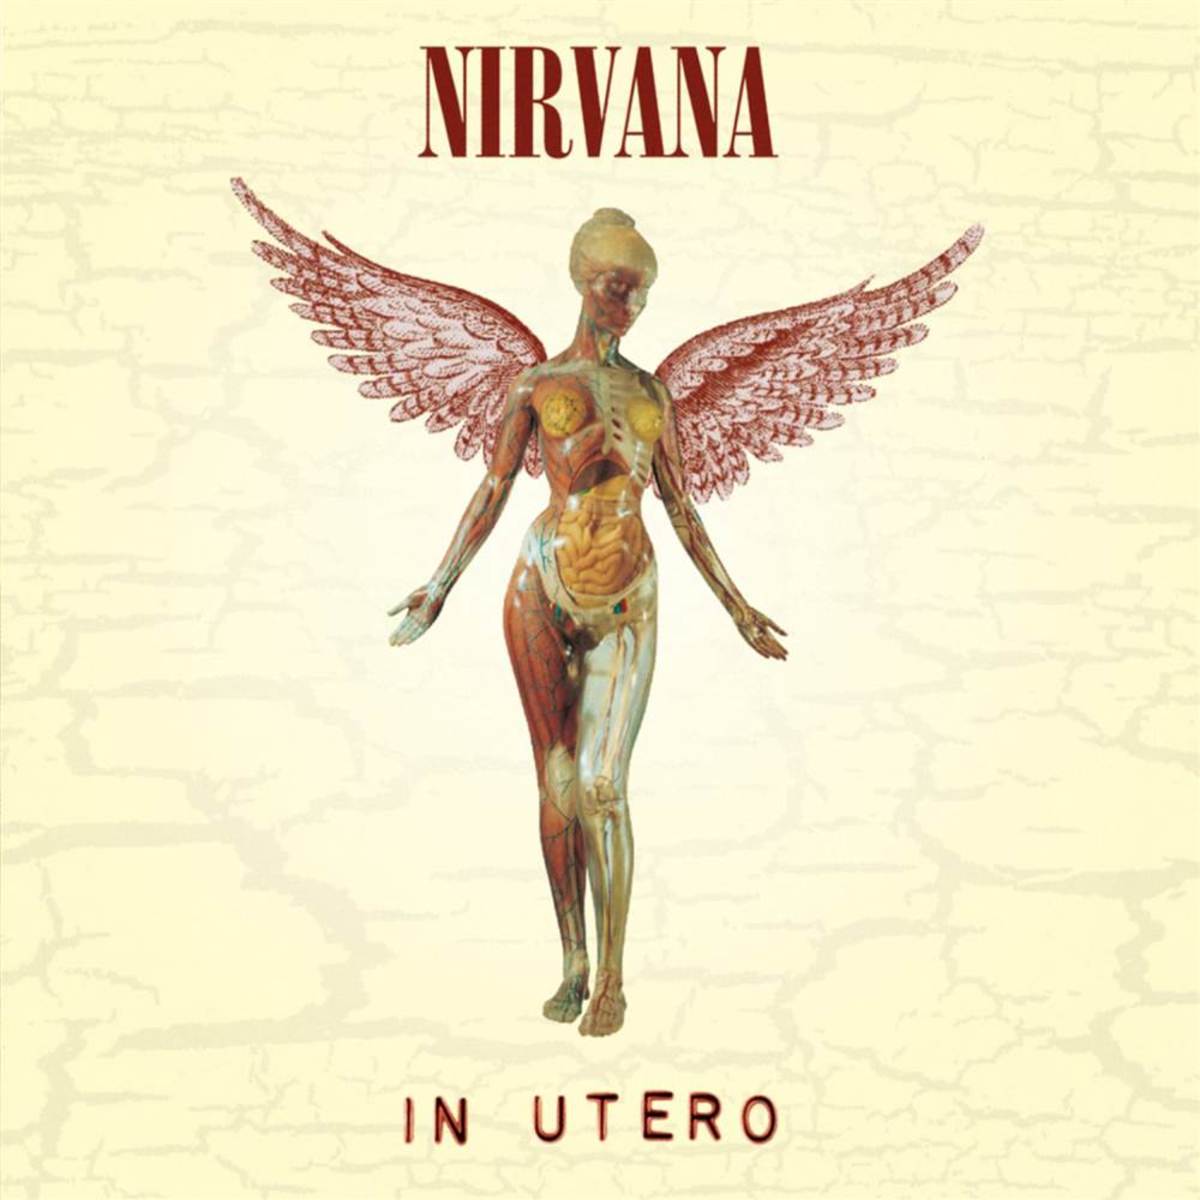 This cover of the album In Utero continues the tradition of strange album covers by the band. The music is better though.